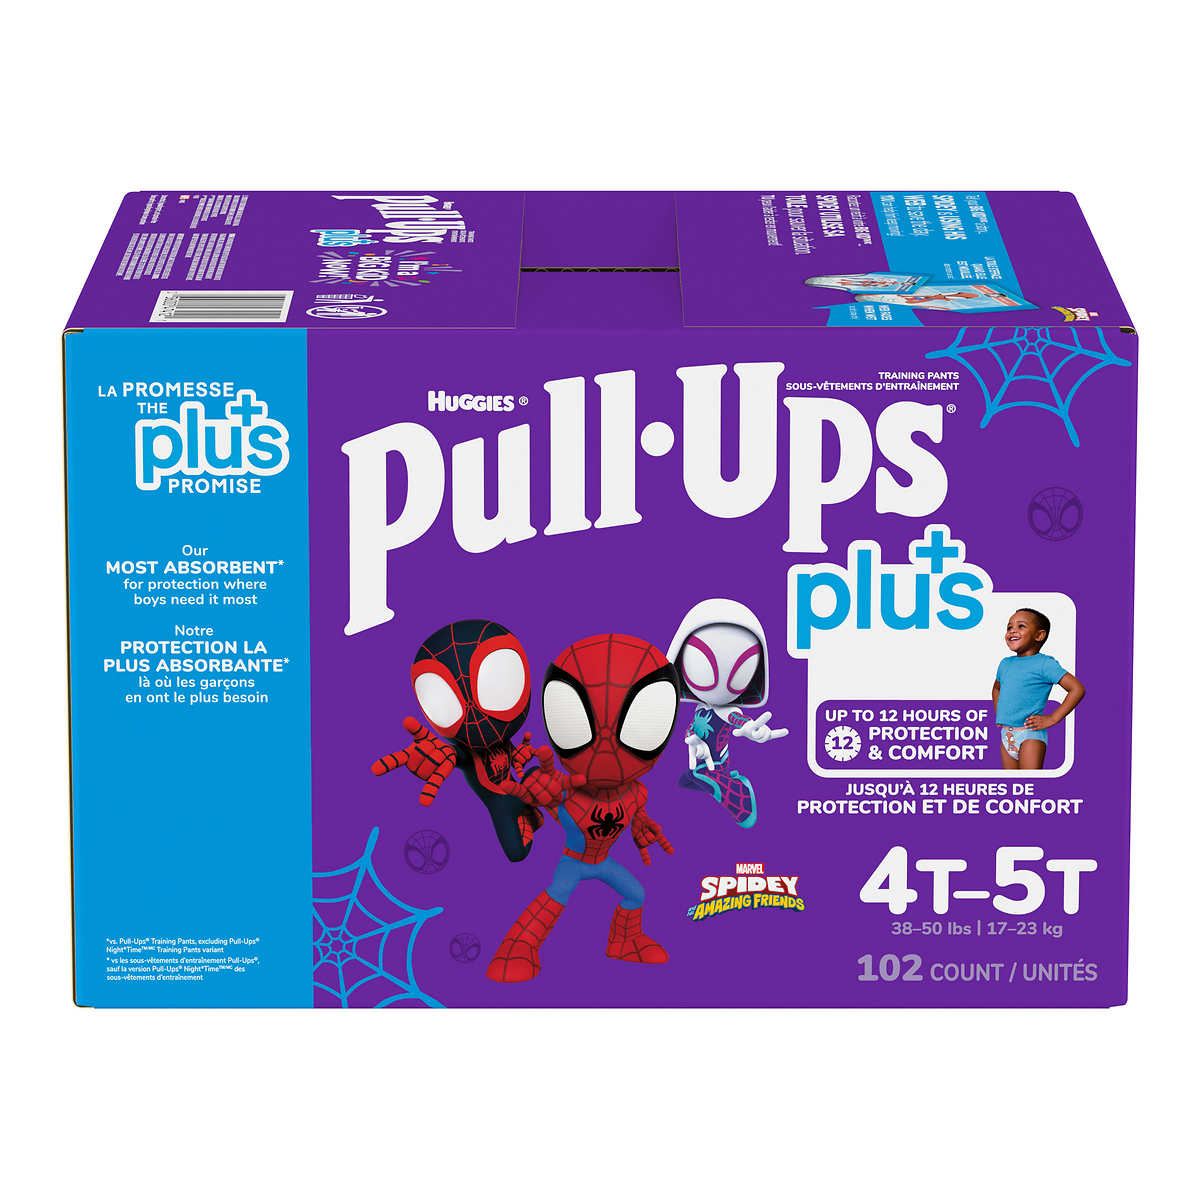 Overnight Adult Pull Up - Do Pull Ups hold more than Diapers